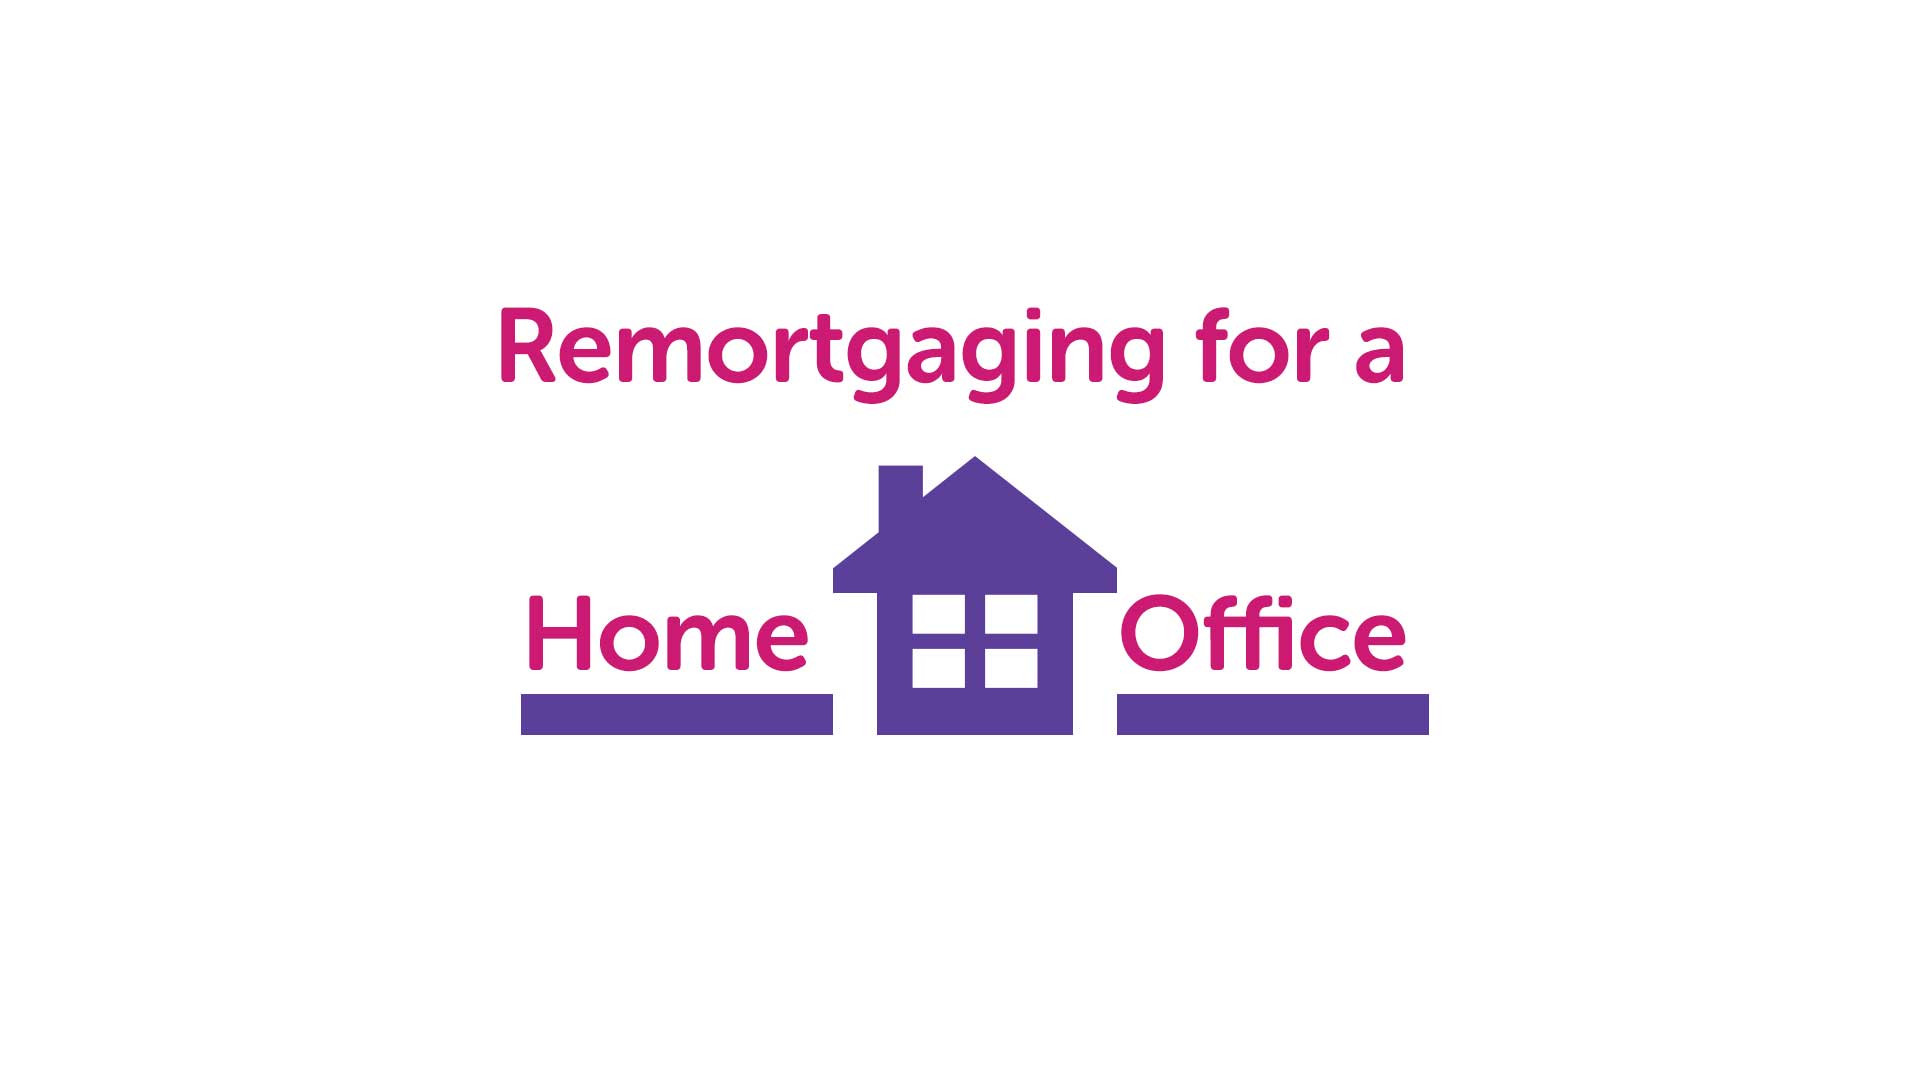 Remortgage for a Home Office in Doncaster